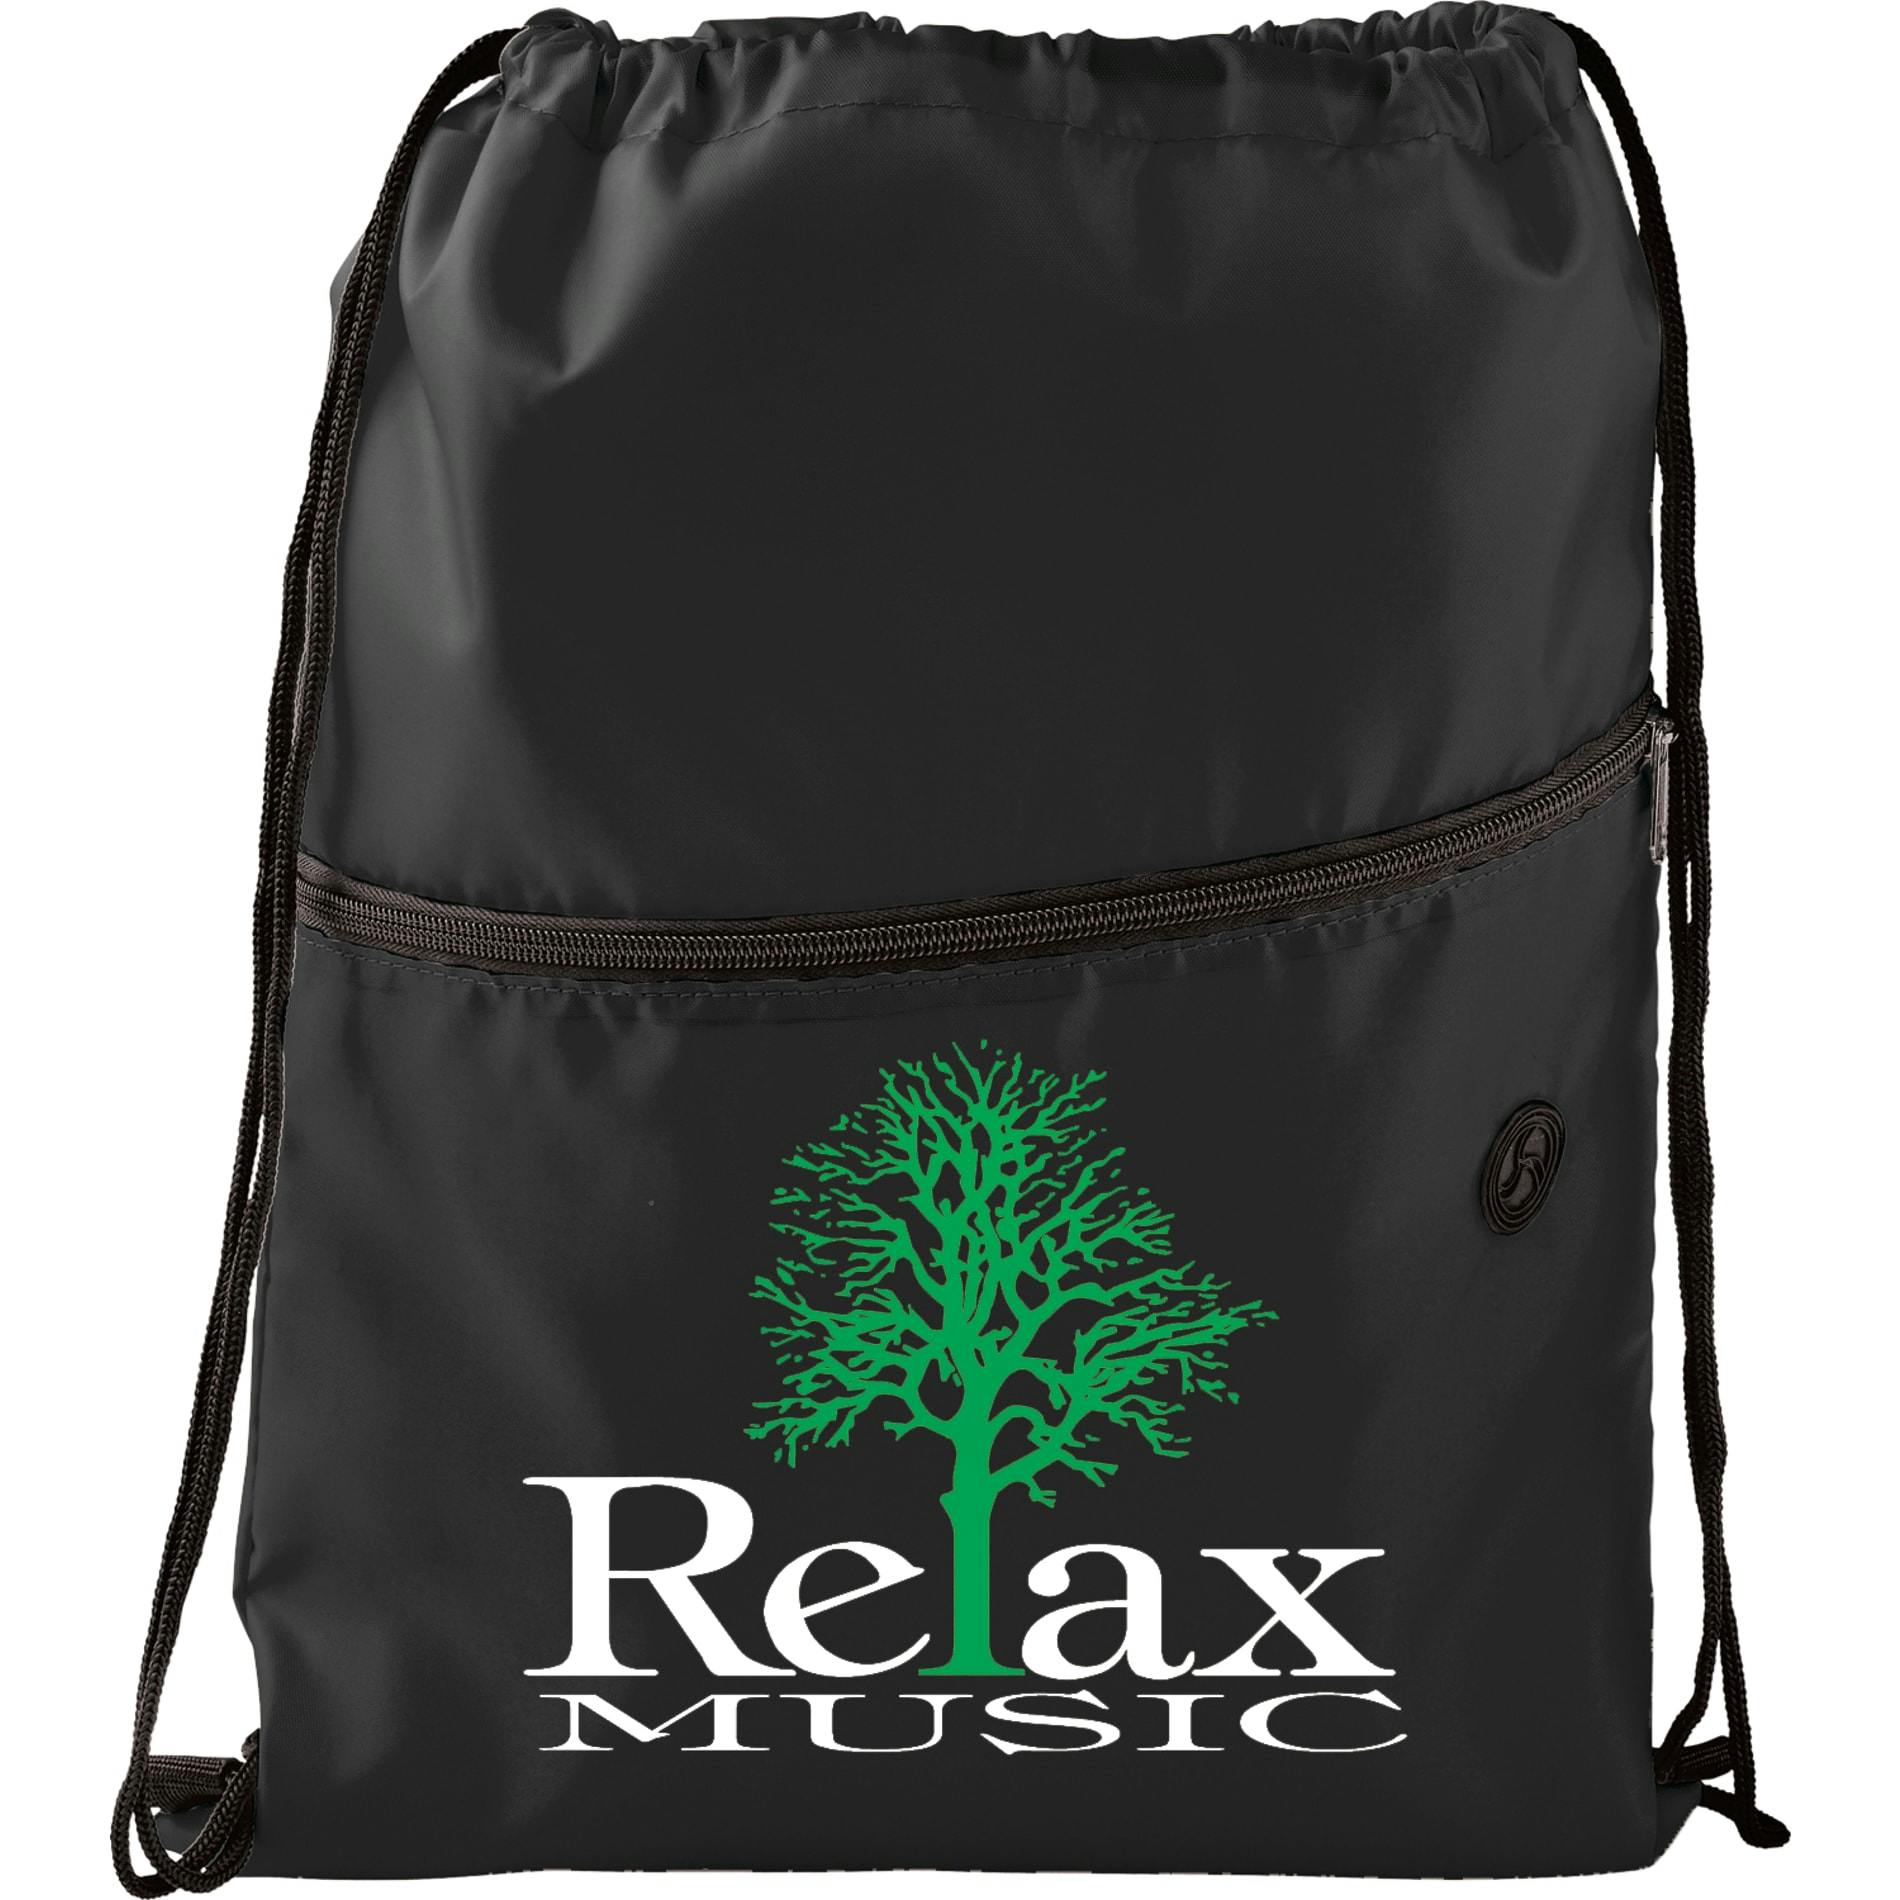 Insulated Zippered Drawstring Bag - additional Image 1